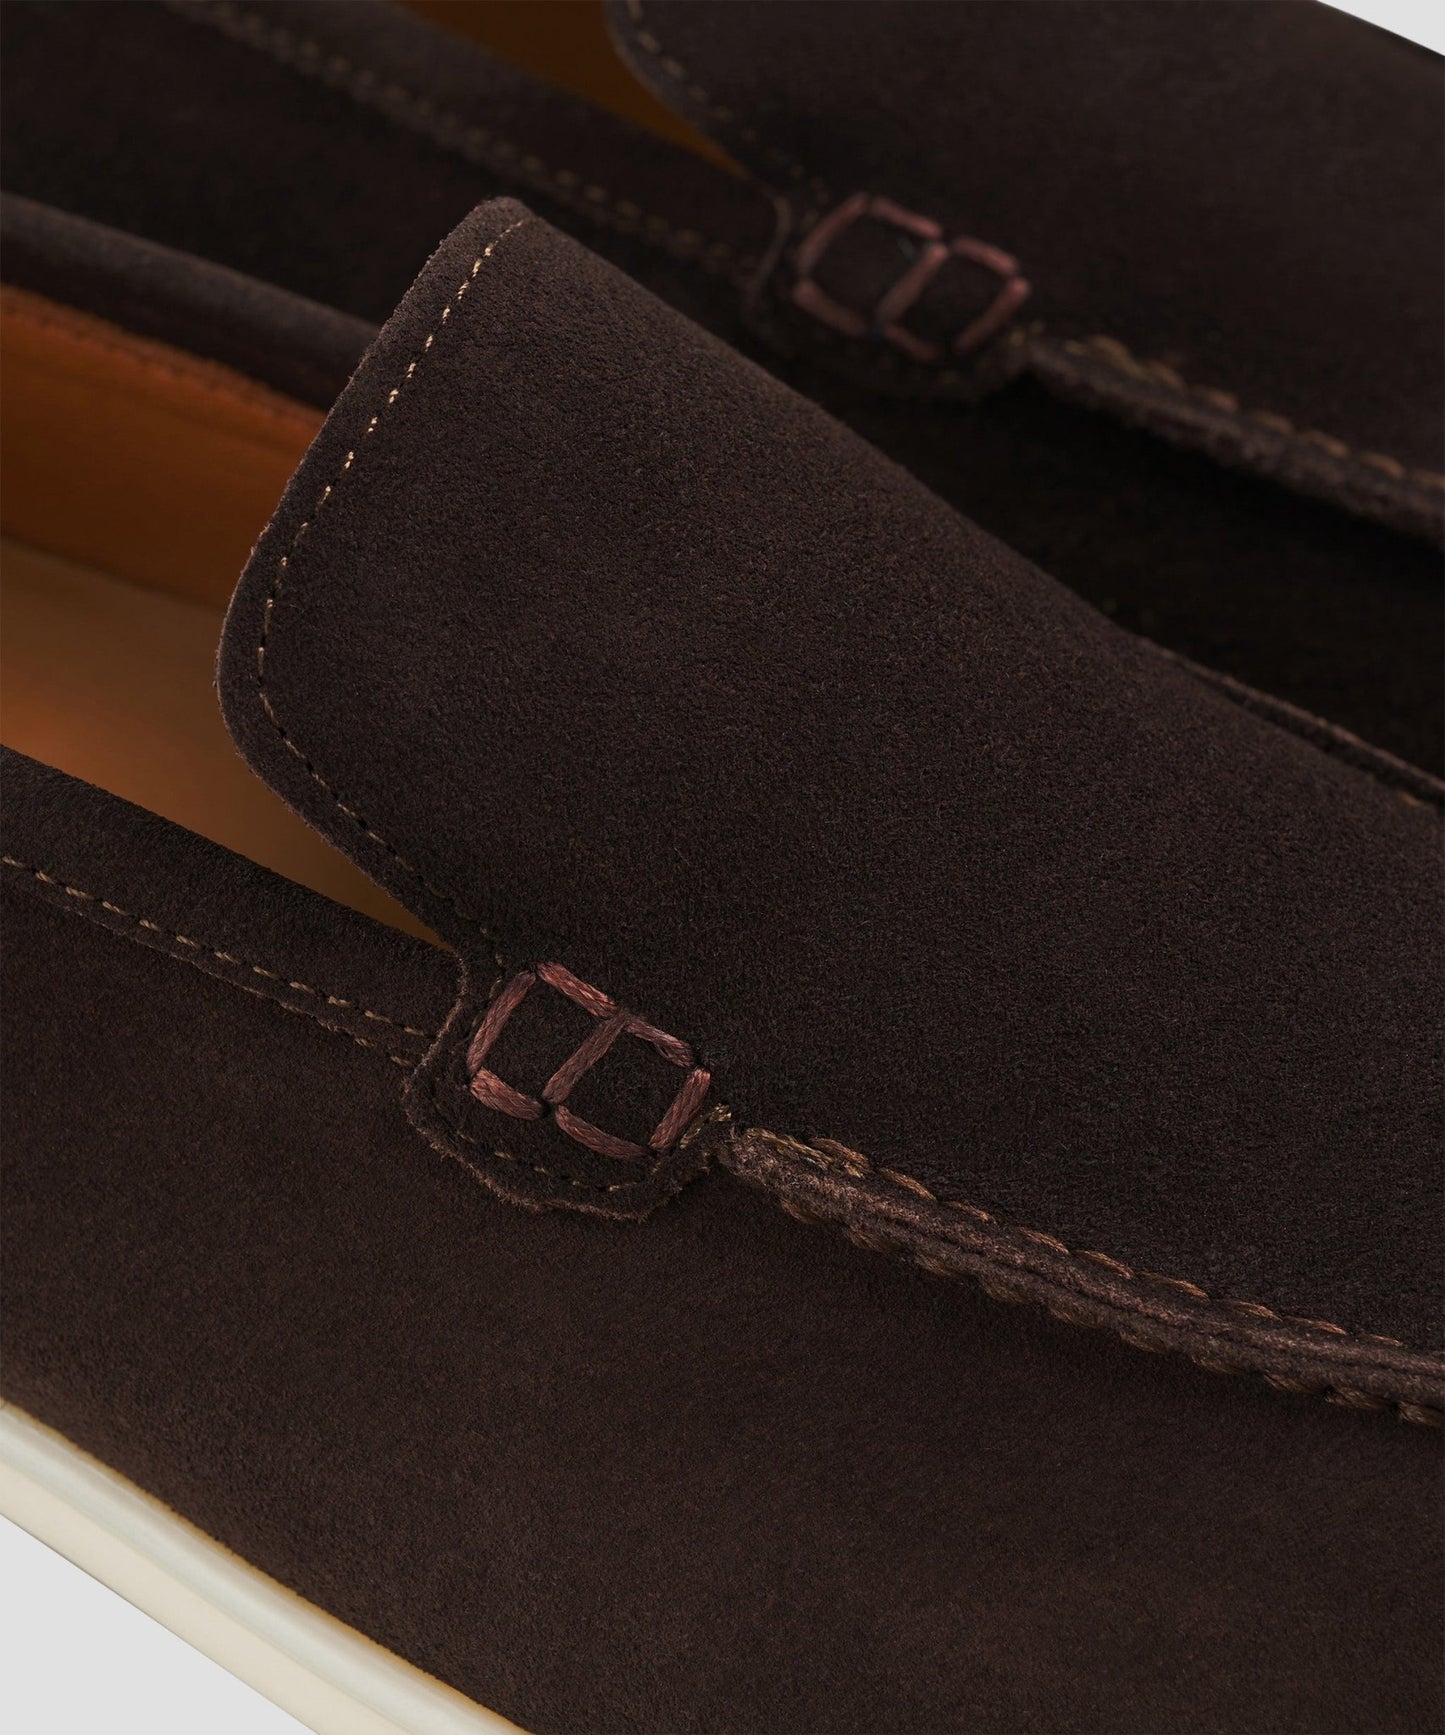 SOCI3TY Summer loafer suède donkerbruin - The Society Shop